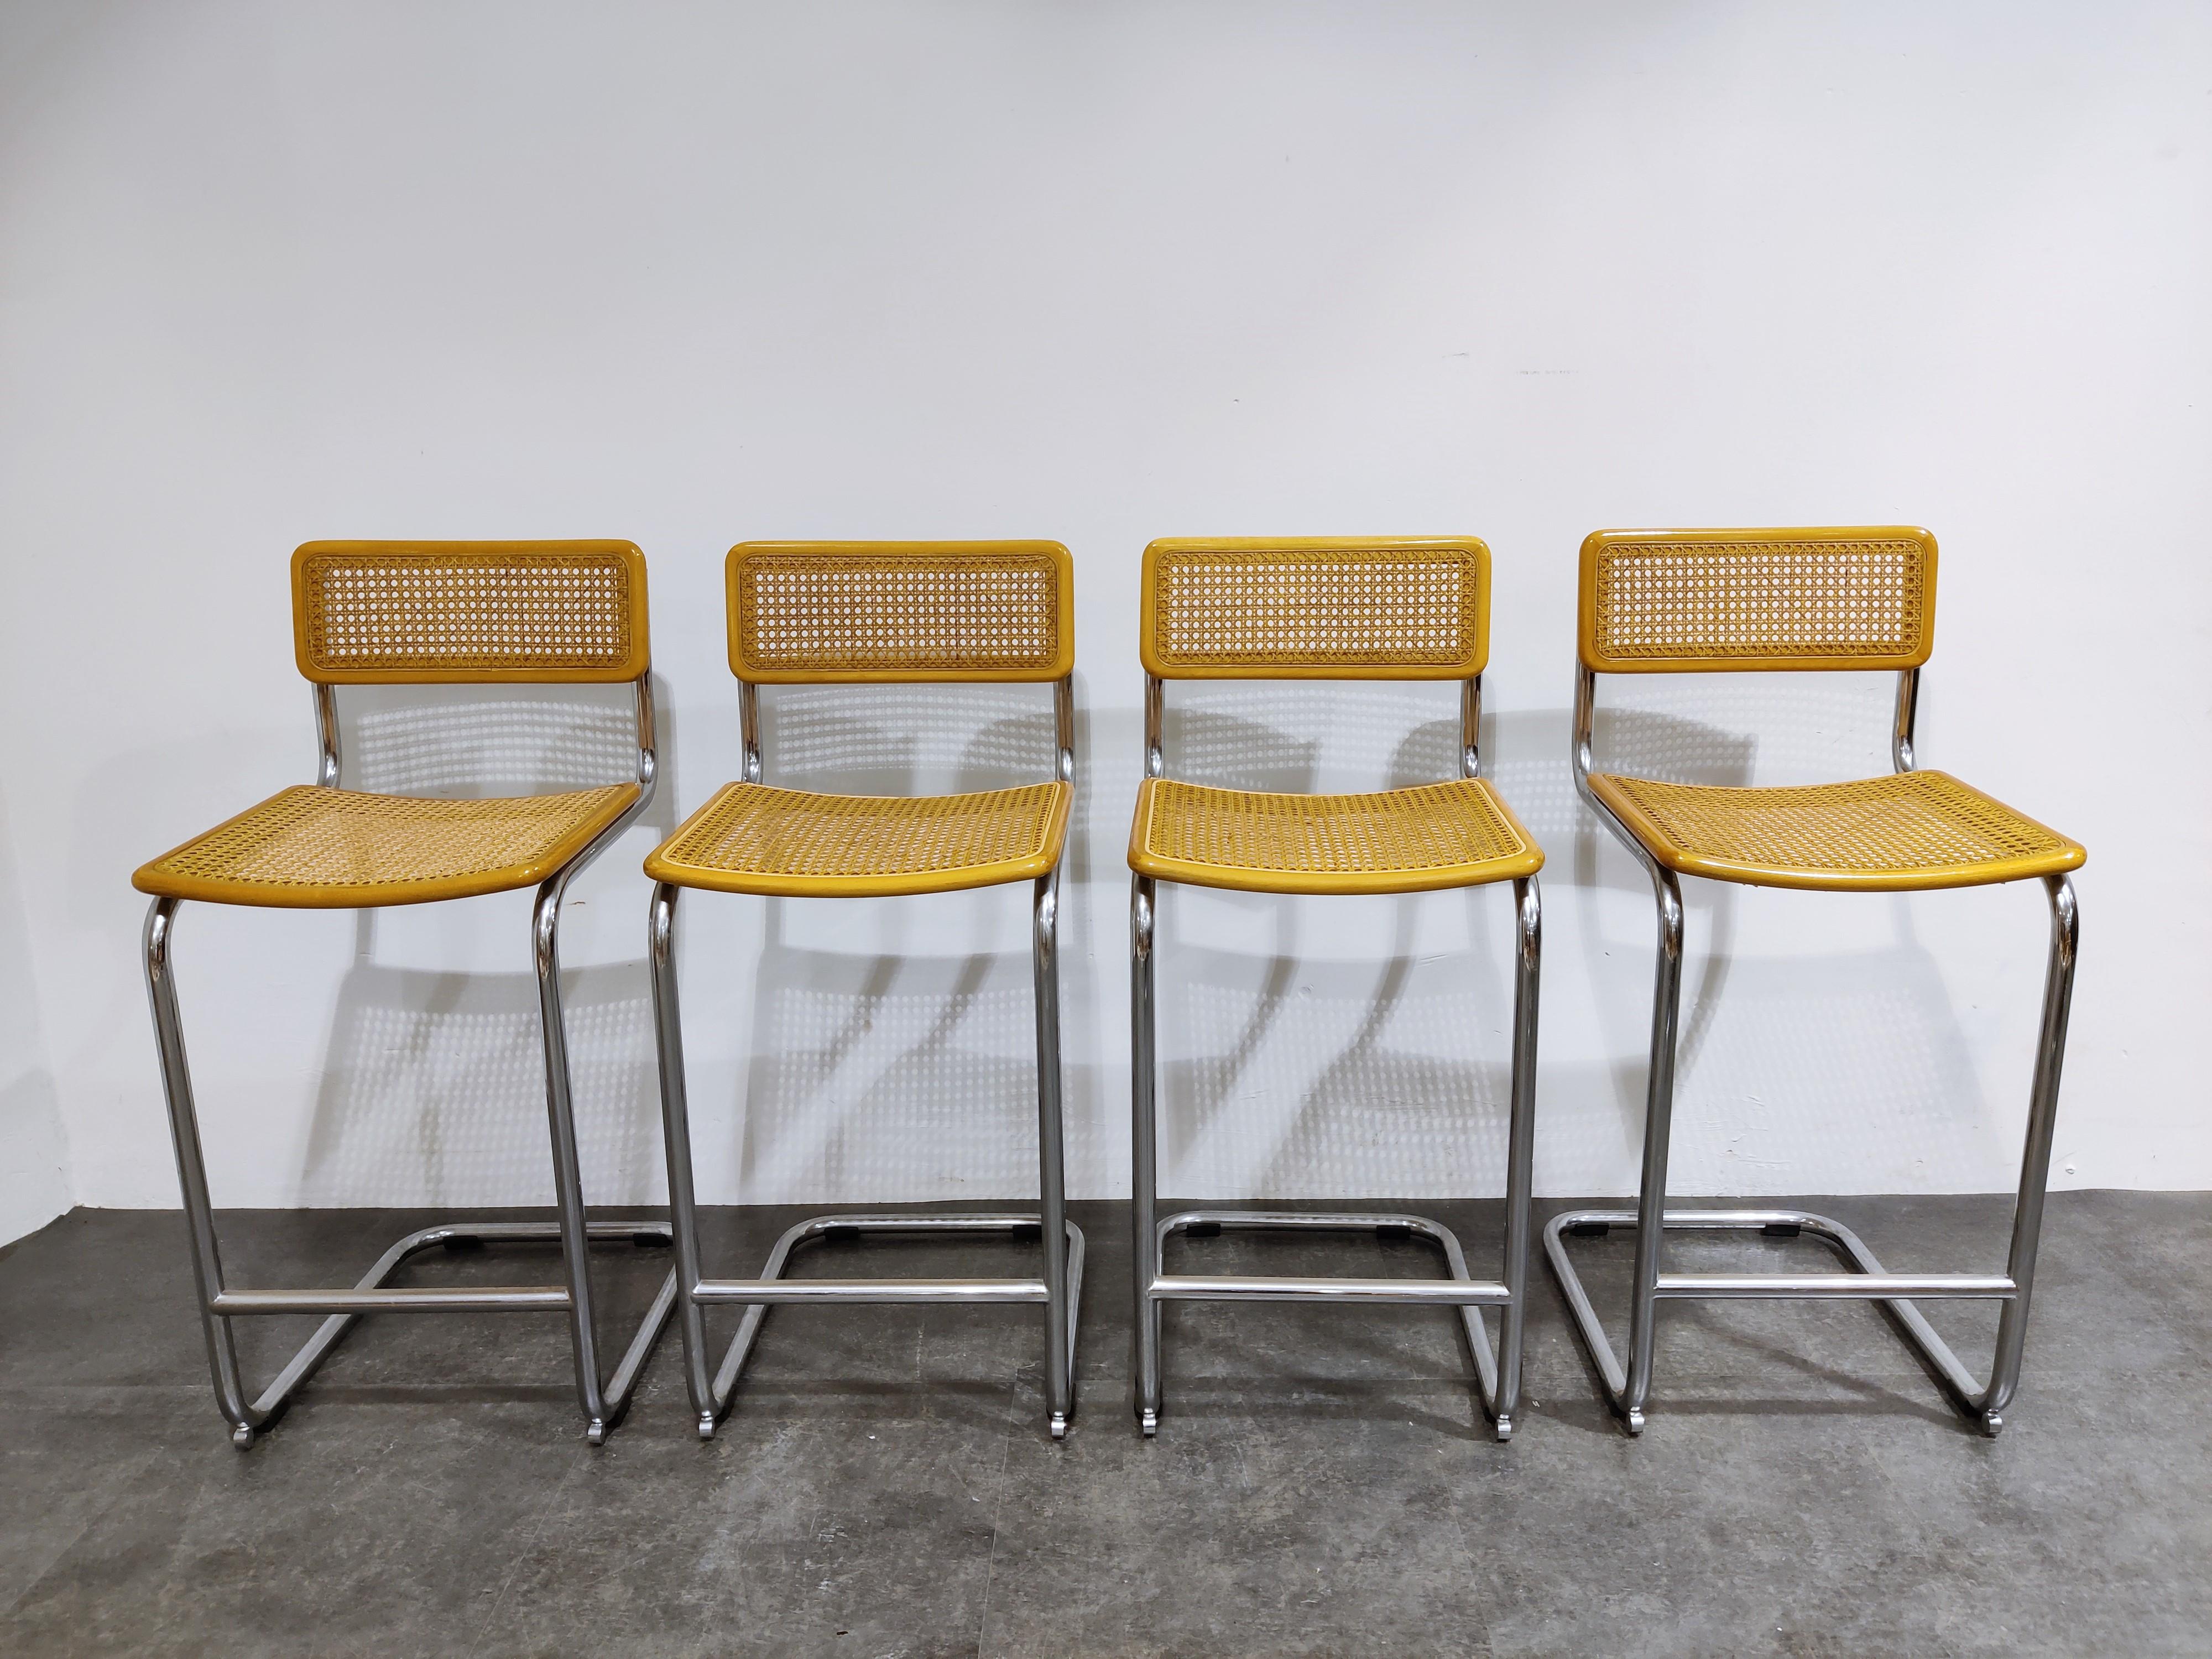 Set of 4 Marcel Breuer Bauhaus design bar stools produced by Cidue (labelled).

Tubular chrome frame with cane seats.

All in very good condition.

Dimensions:
Height: 93cm/36.61